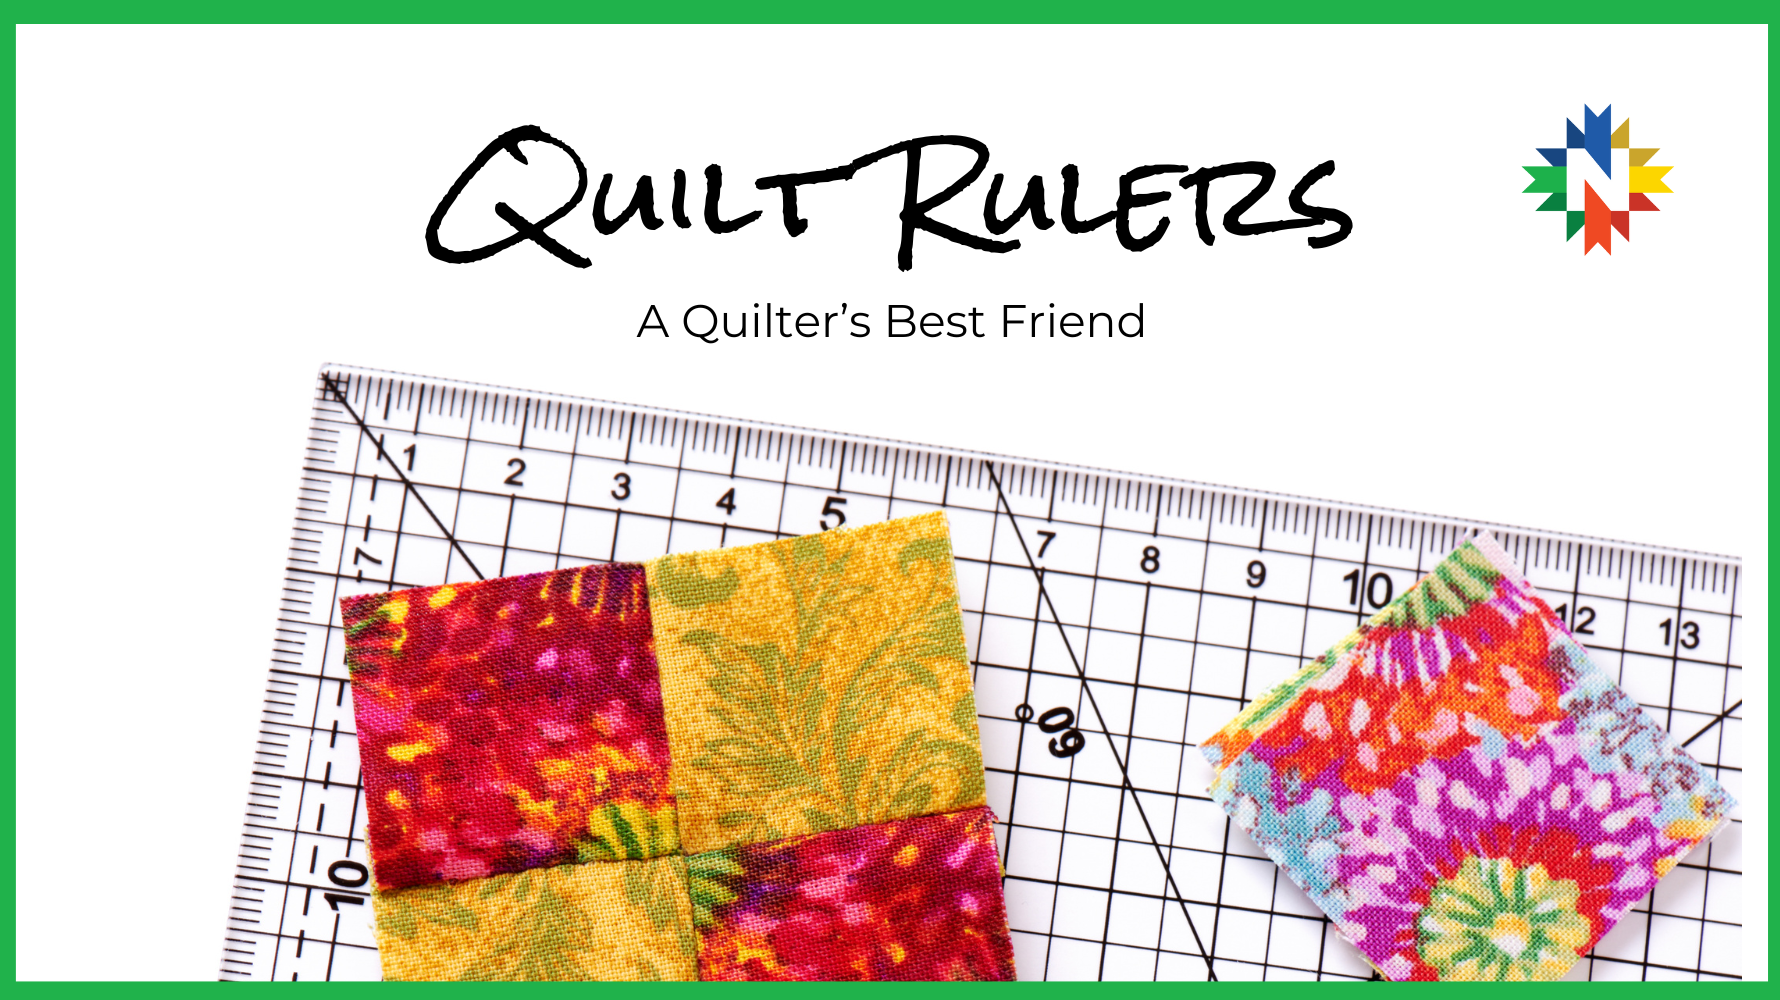 Quilt Rulers Are a Quilter’s Best Friend